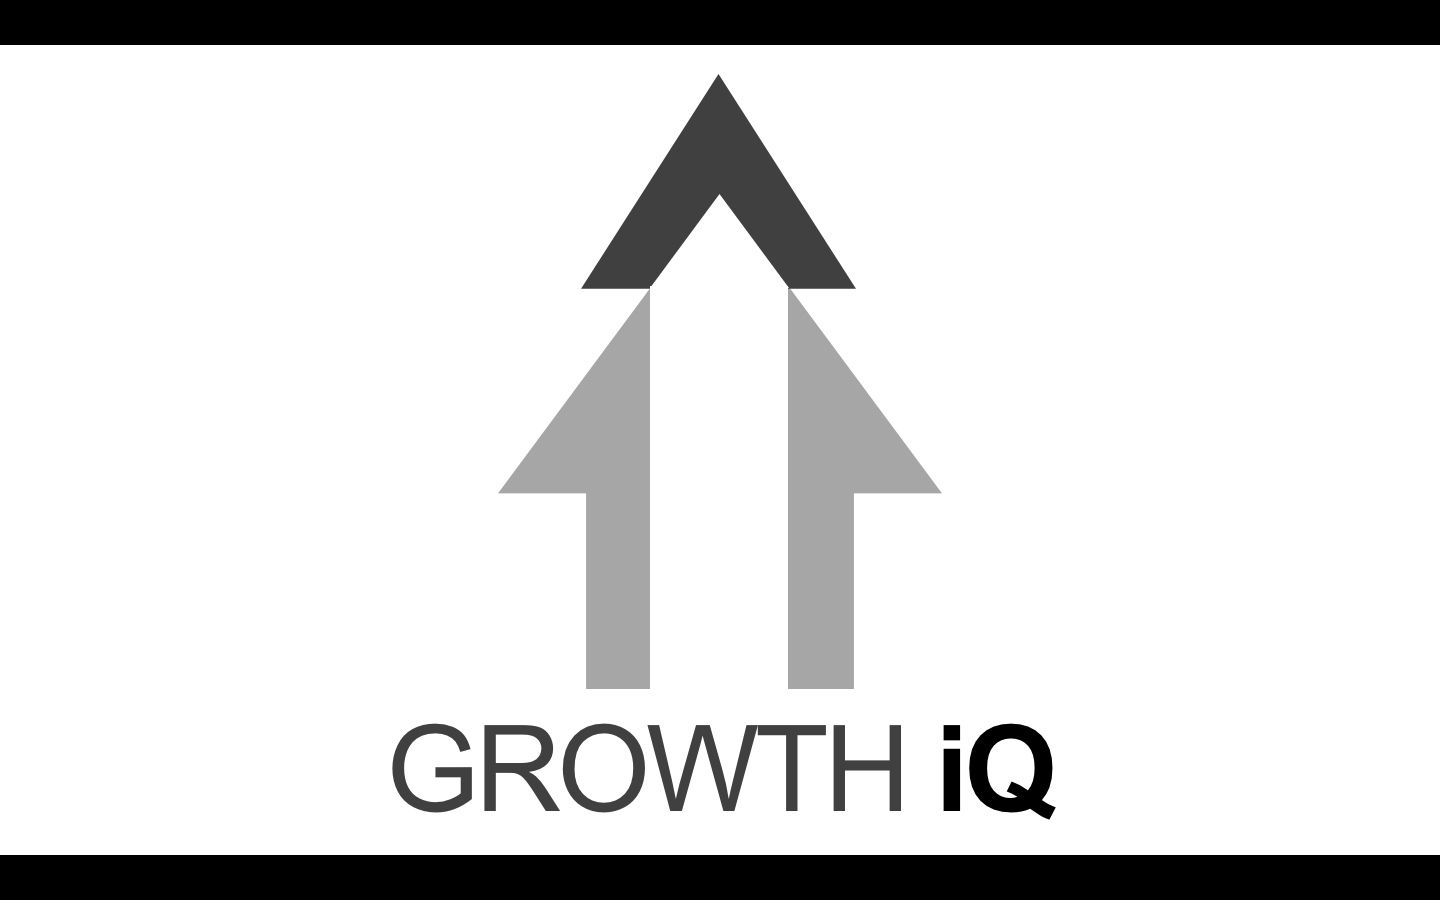 Aiden Logo - Serious, Modern, Business Consultant Logo Design for Growth iQ by ...